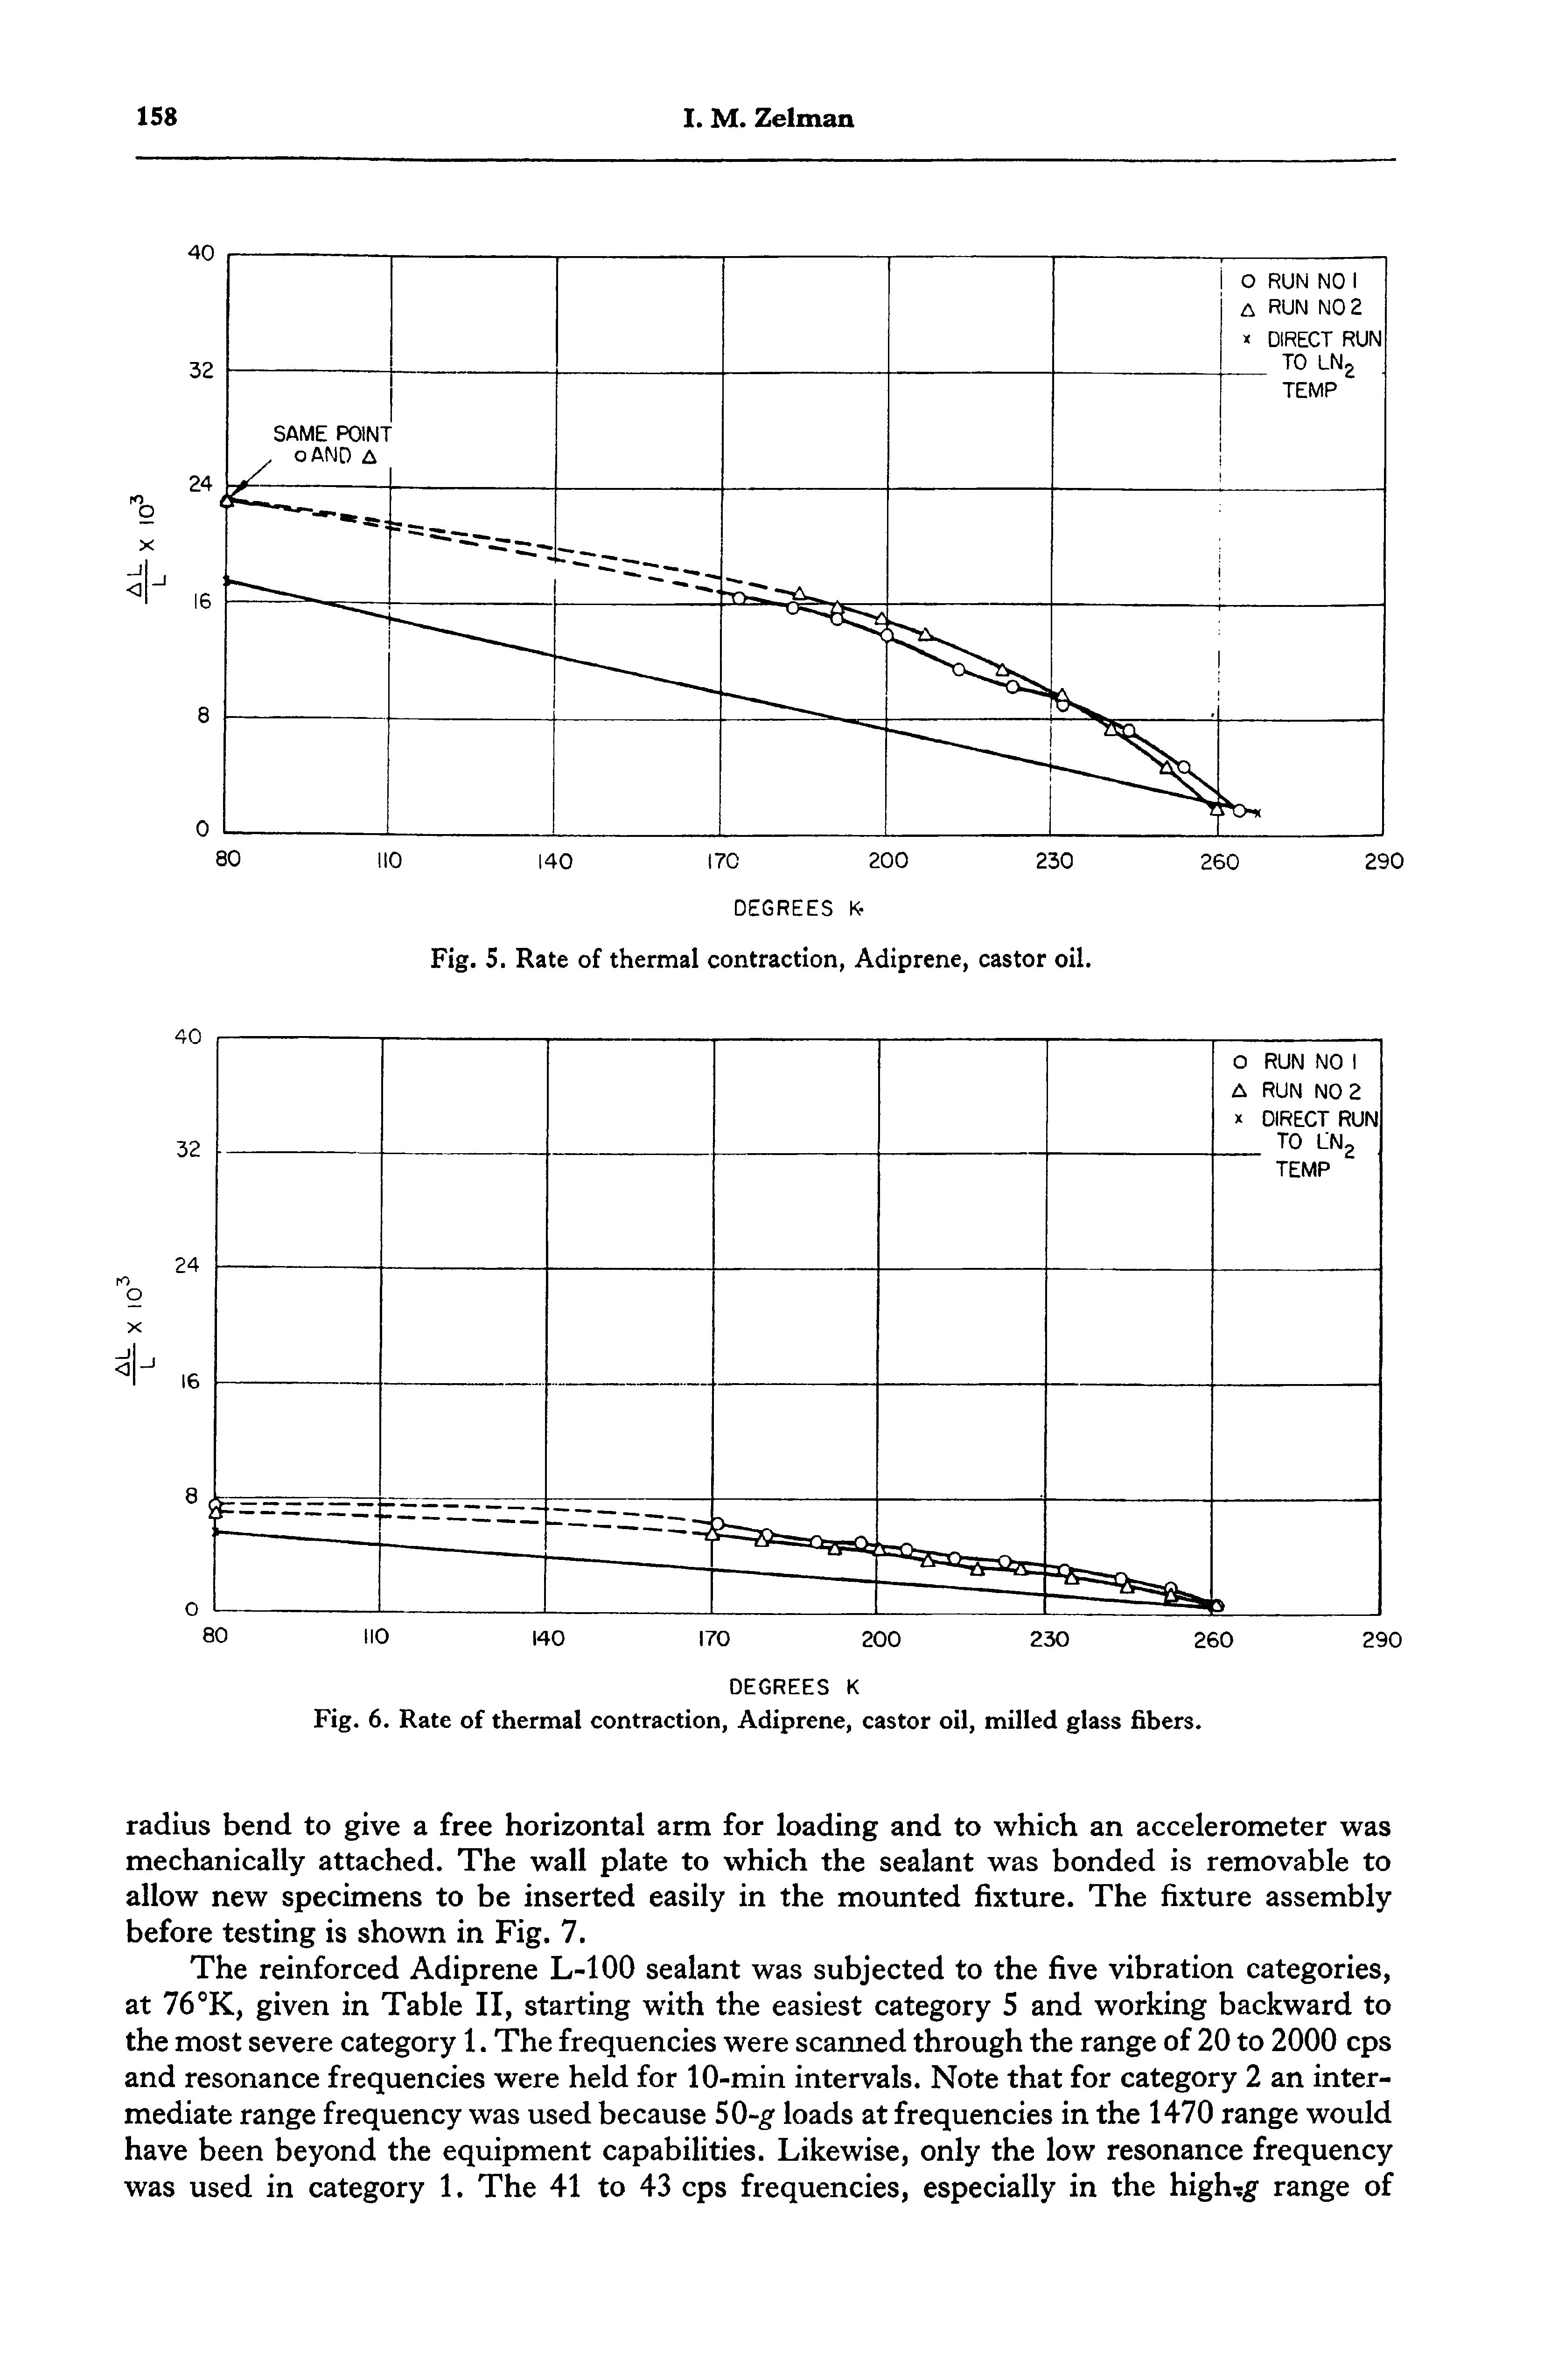 Fig. 6. Rate of thermal contraction, Adiprene, castor oil, milled glass fibers.